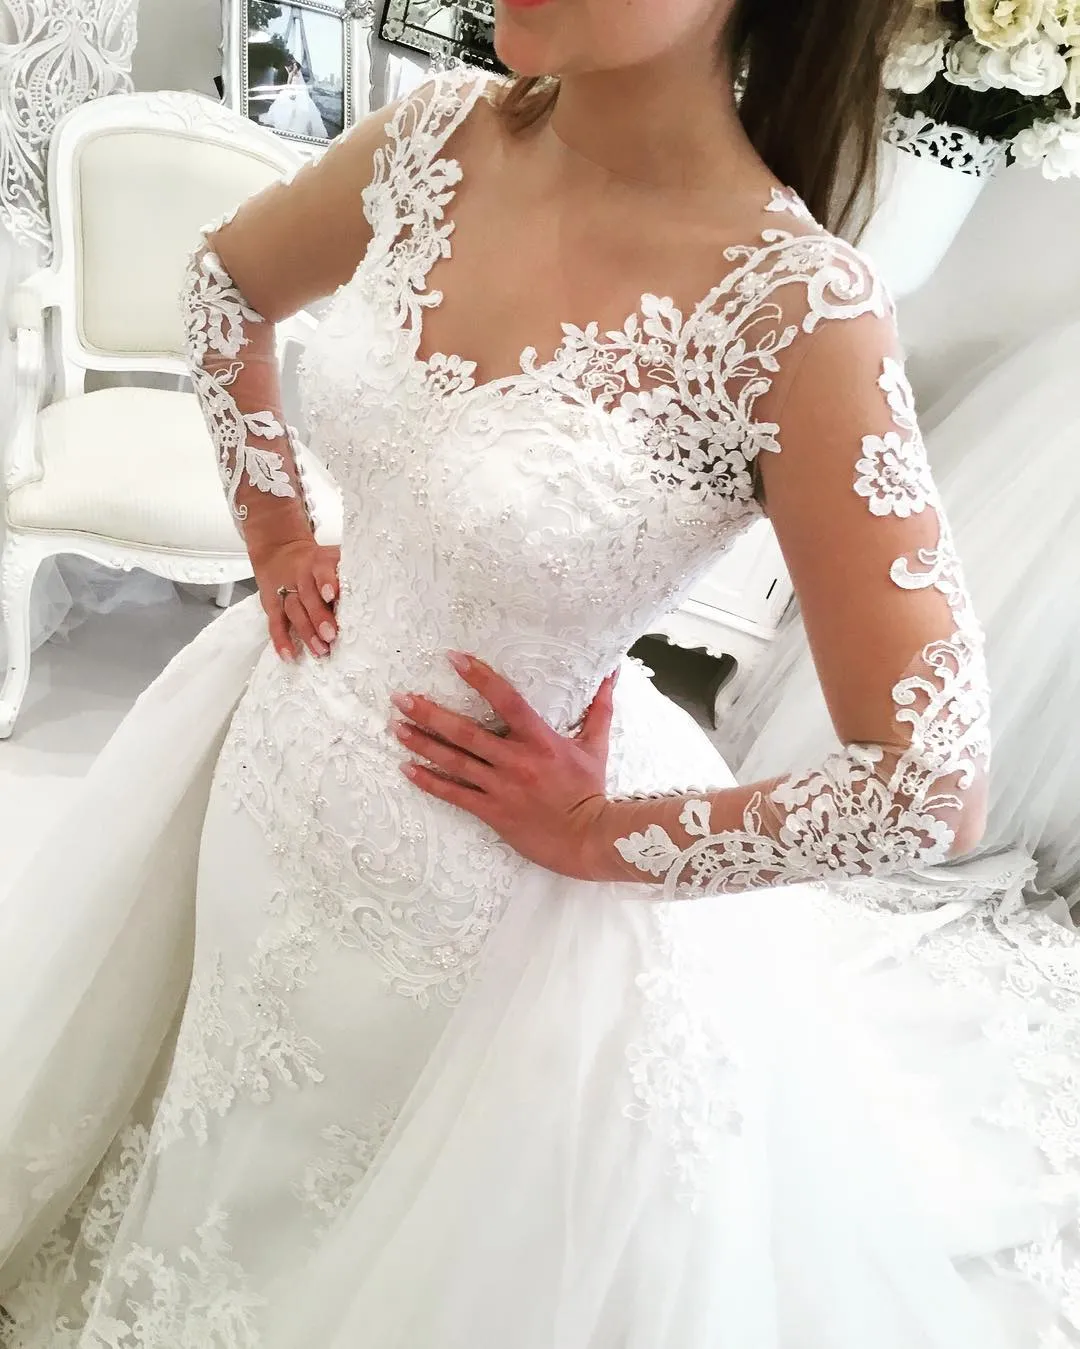 Vintage Long Sleeve Mermaid Wedding Dresses With Detachable Train V Neck Crystal Bridal Gowns Full Lace Applique Backless Bride Dress